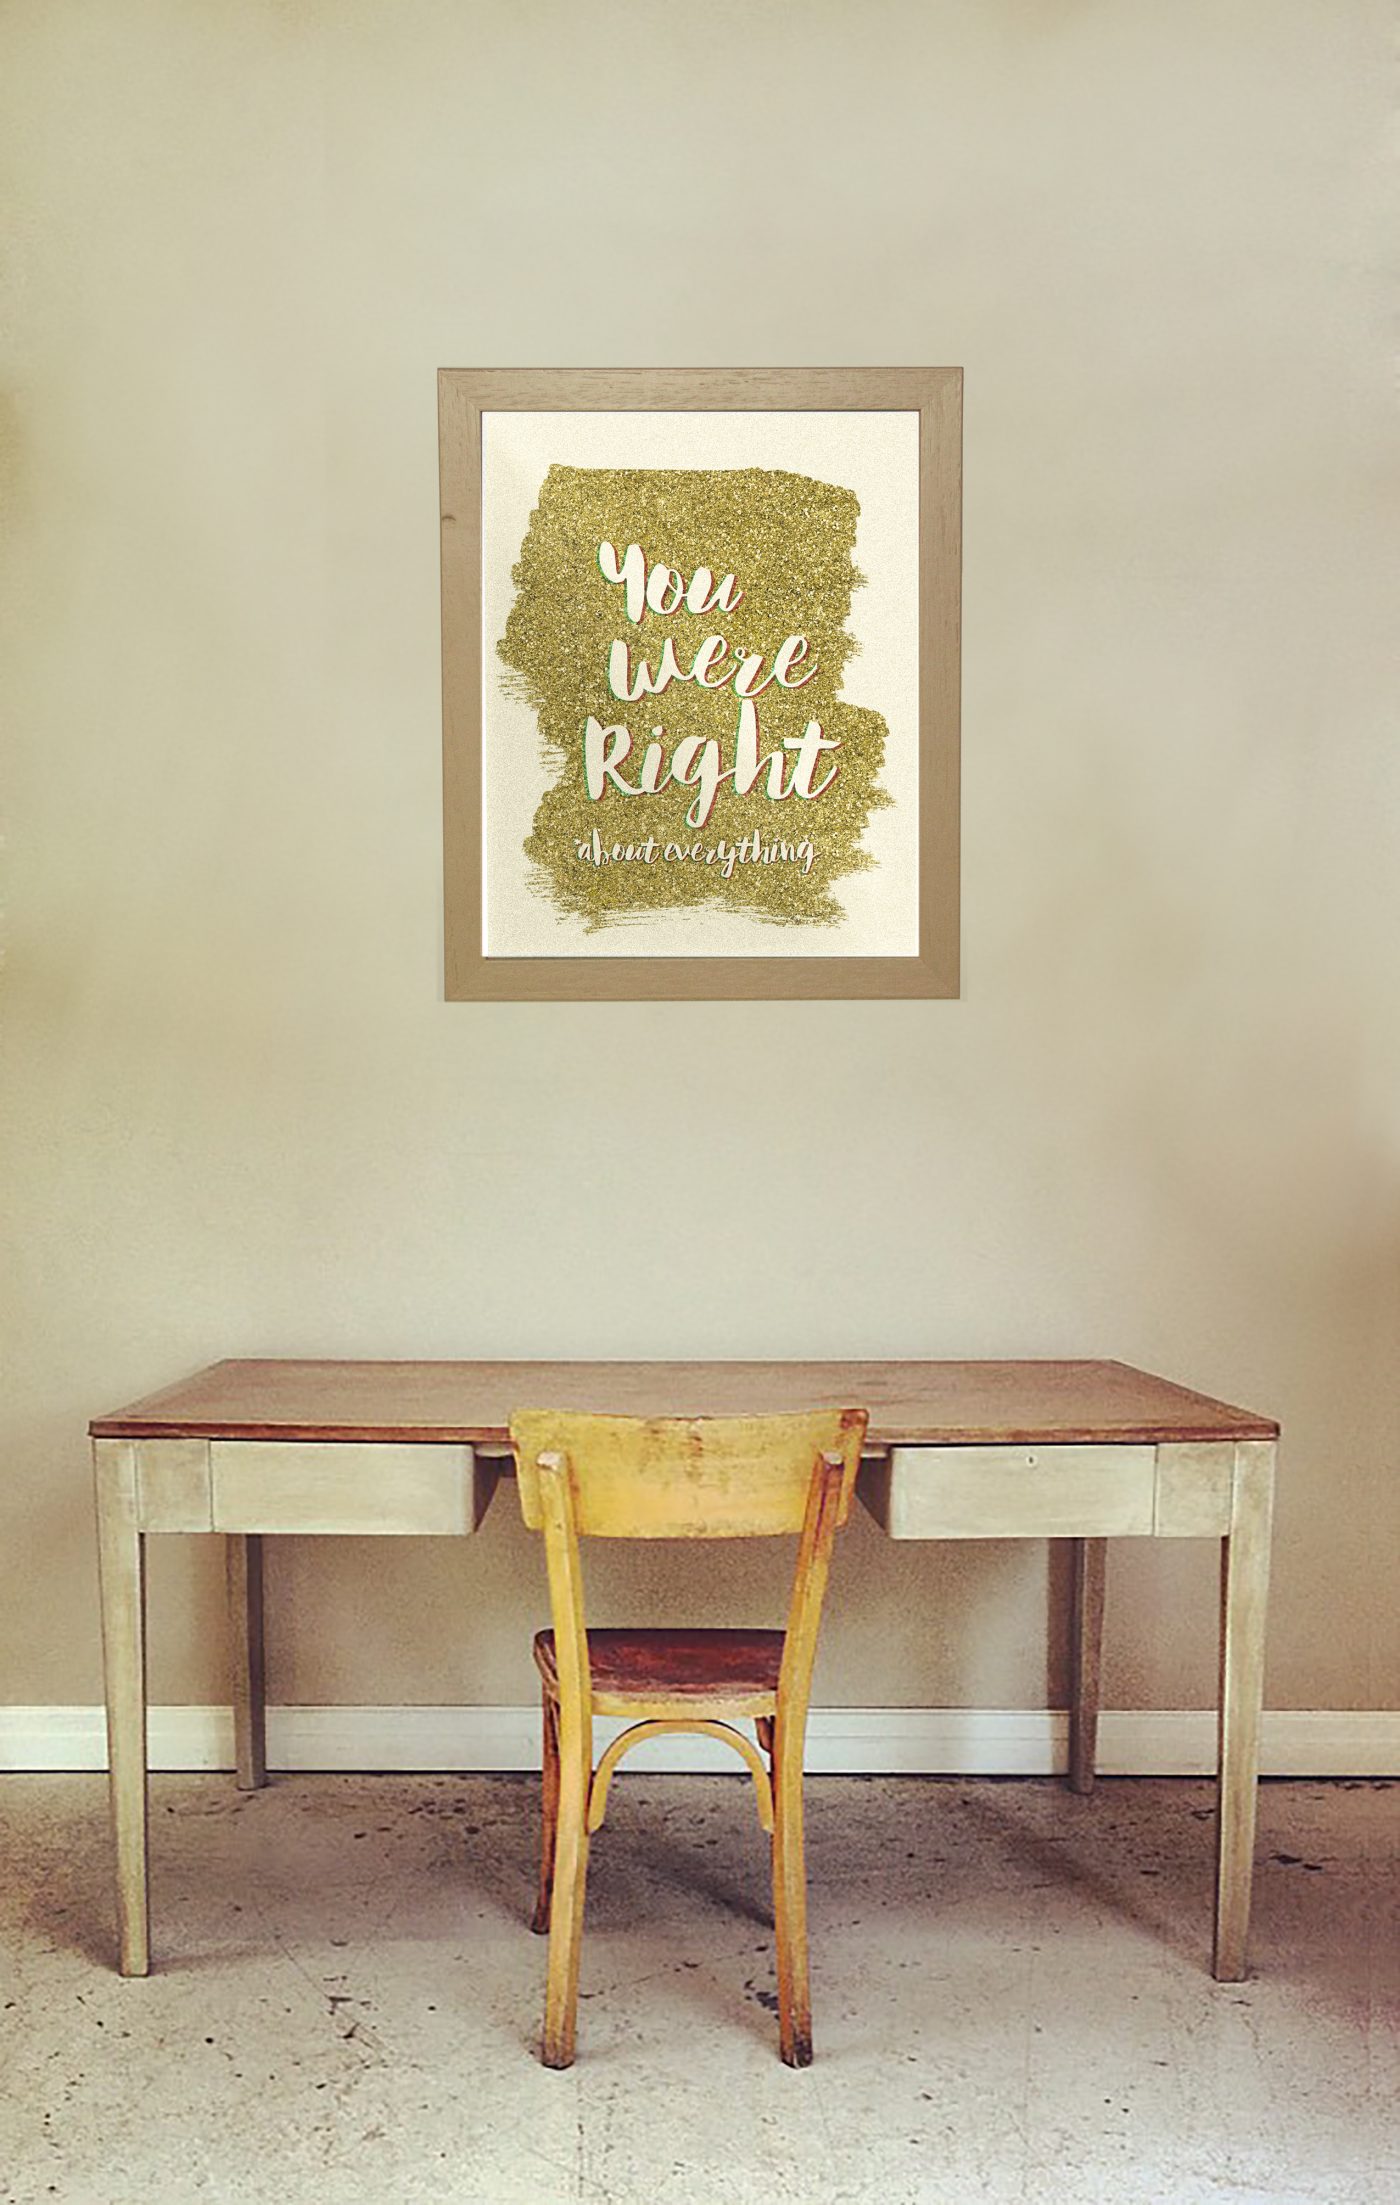 Free Art Printable: You Were Right (About Everything)